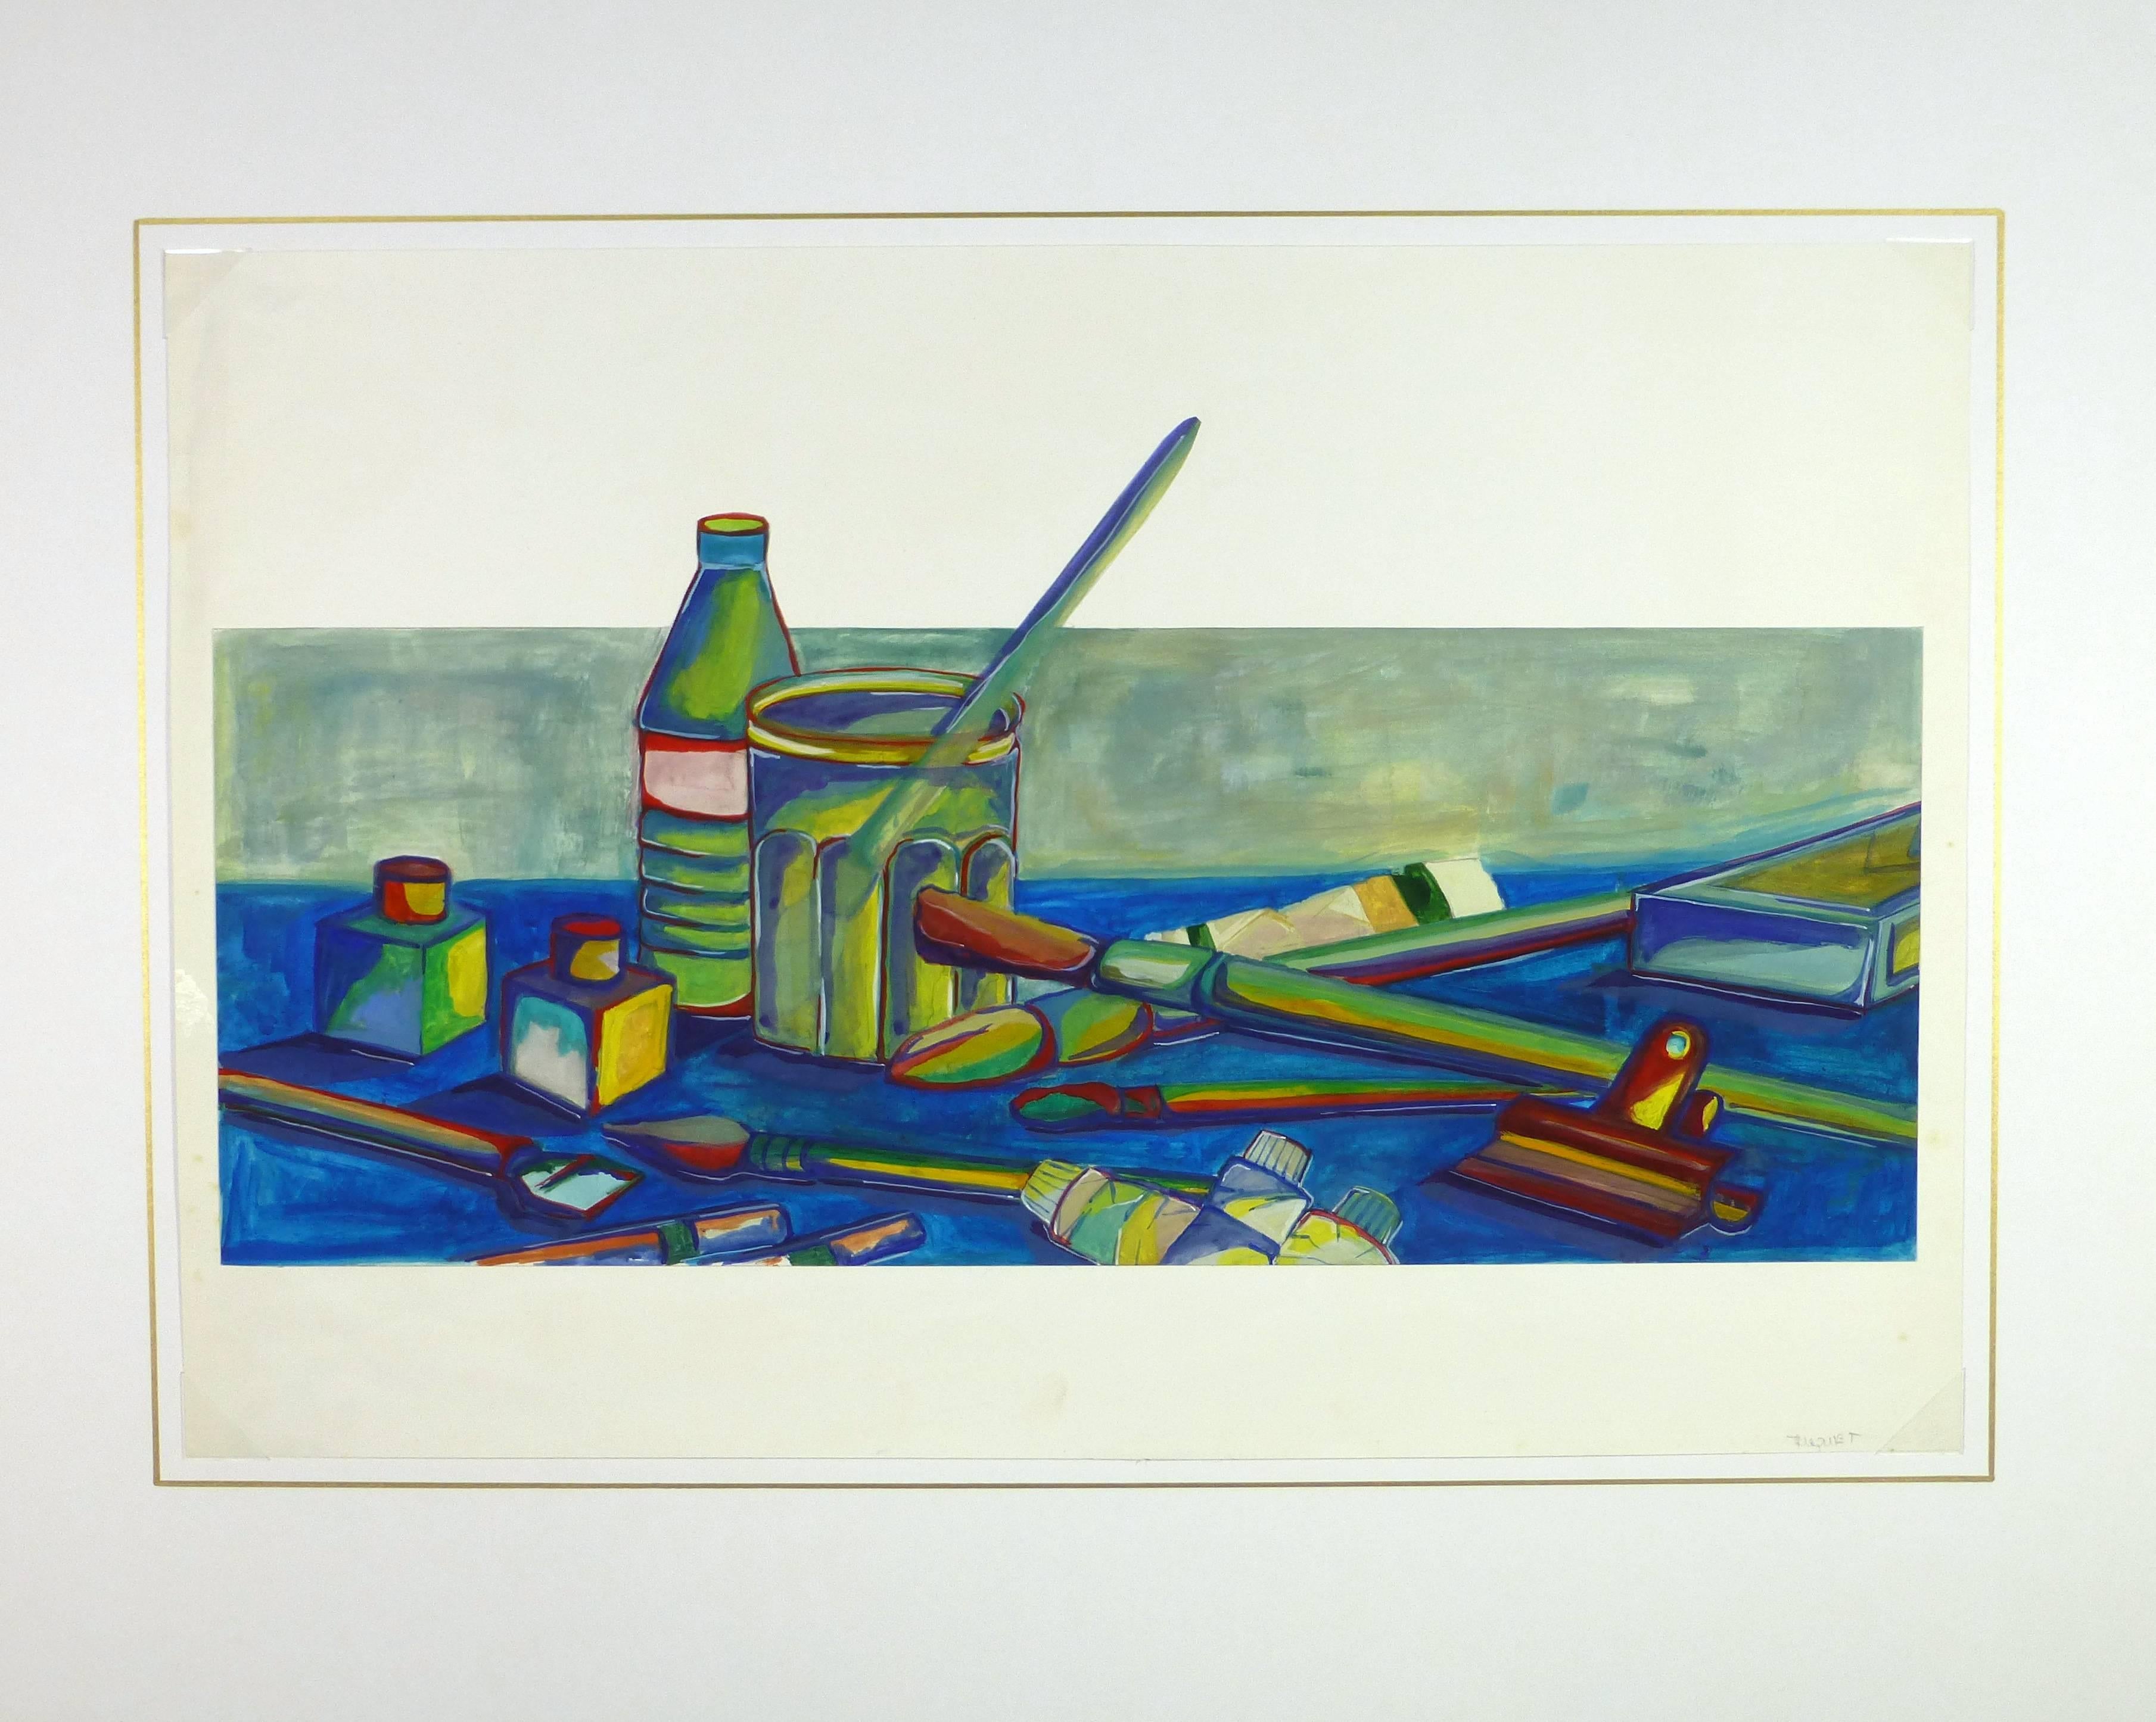 Colorful artist still life in acrylic collated to white background by French artist Riquet, 1990s.  

Original artwork on paper displayed on a white mat with a gold border. Archival plastic sleeve and Certificate of Authenticity included. Artwork,